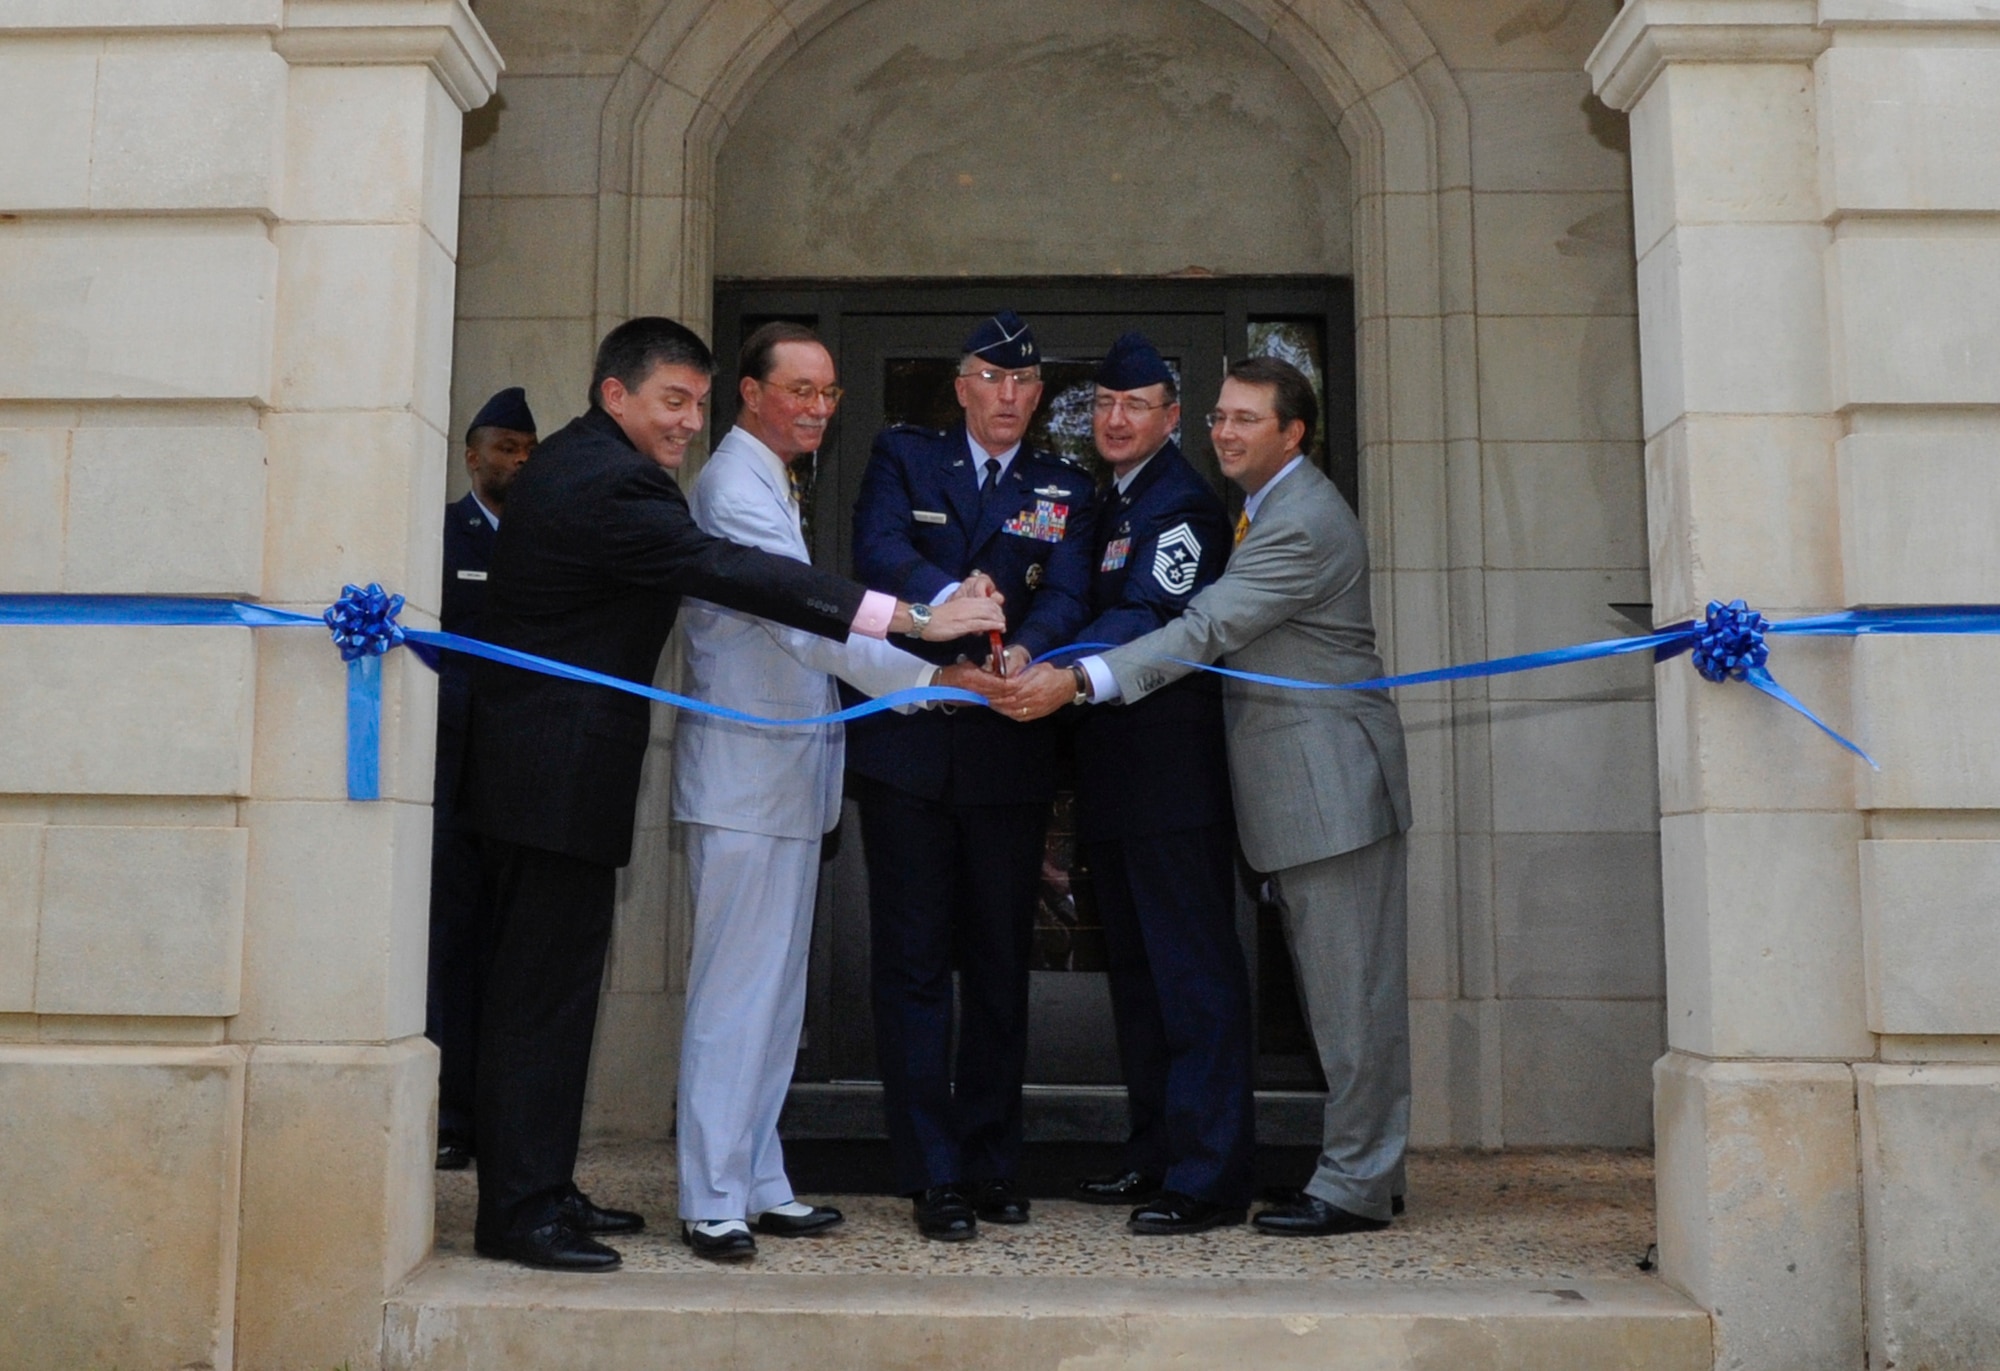 (Left to Right) Gary Hubbard, Murray Viser, Maj. Gen. Scott Vander Hamm, Eighth Air Force commander, Chief Master Sgt. Marty Anderson, Eighth AF command chief, and John Adkins cut a ribbon during the Eighth Air Force grand opening ceremony on Barksdale Air Force Base, La., July 2, 2014. The Eighth Air Force team consists of more than 16,000 active-duty, Air National Guard and Reserve professionals operating and maintaining a variety of aircraft capable of deploying air power to any area of the world. (U.S. Air Force photo/Senior Airman Kristin High)